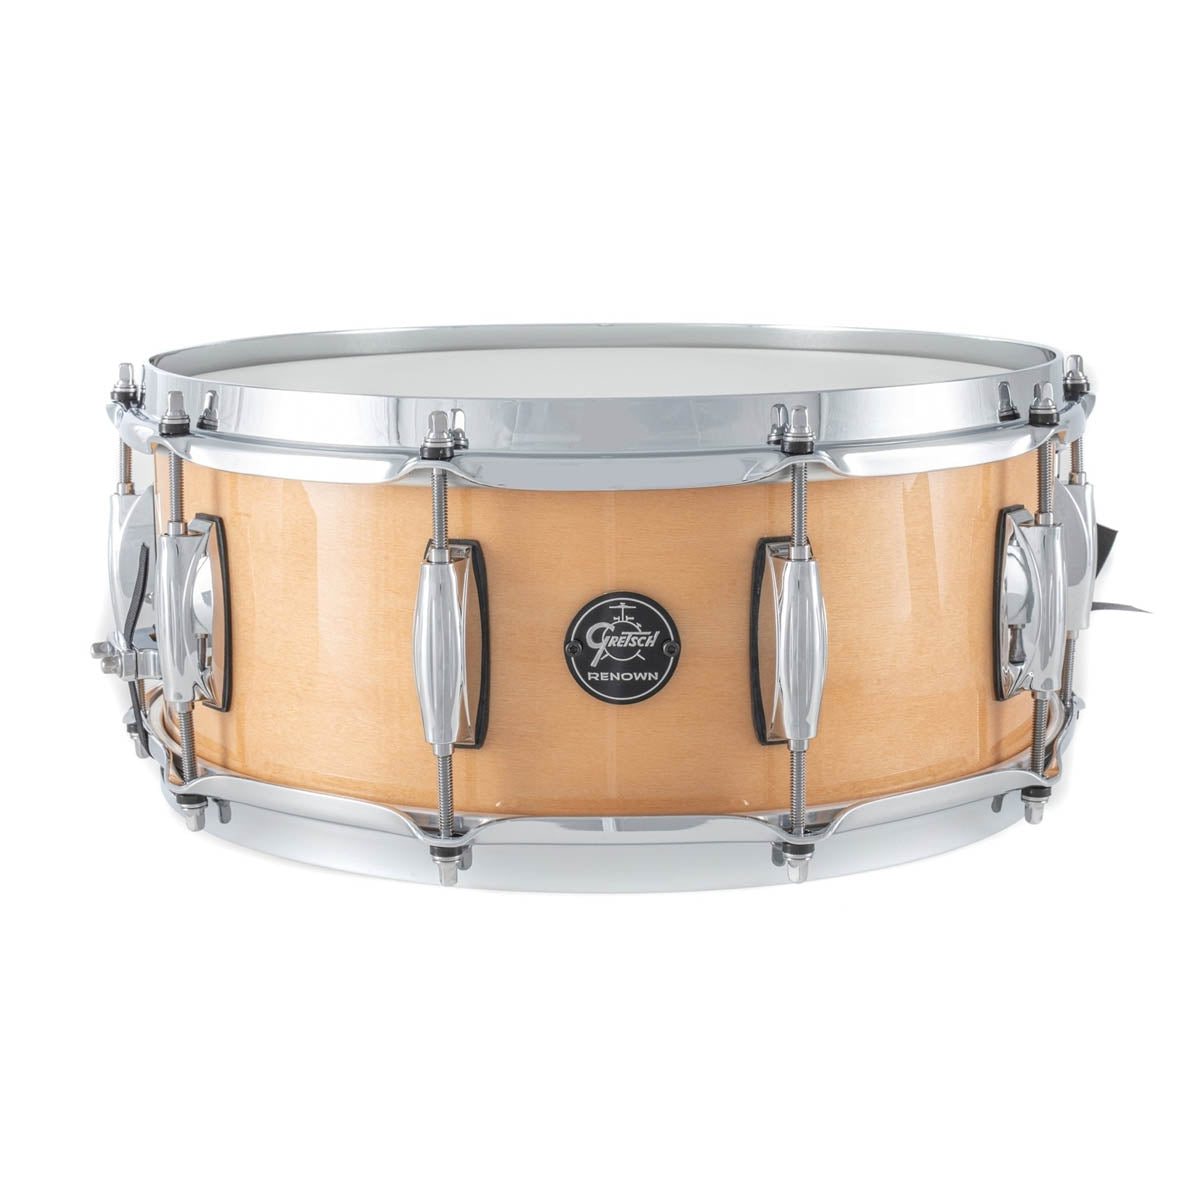 Gretsch Renown Maple 14"x5.5" Snare Drum in Gloss Natural